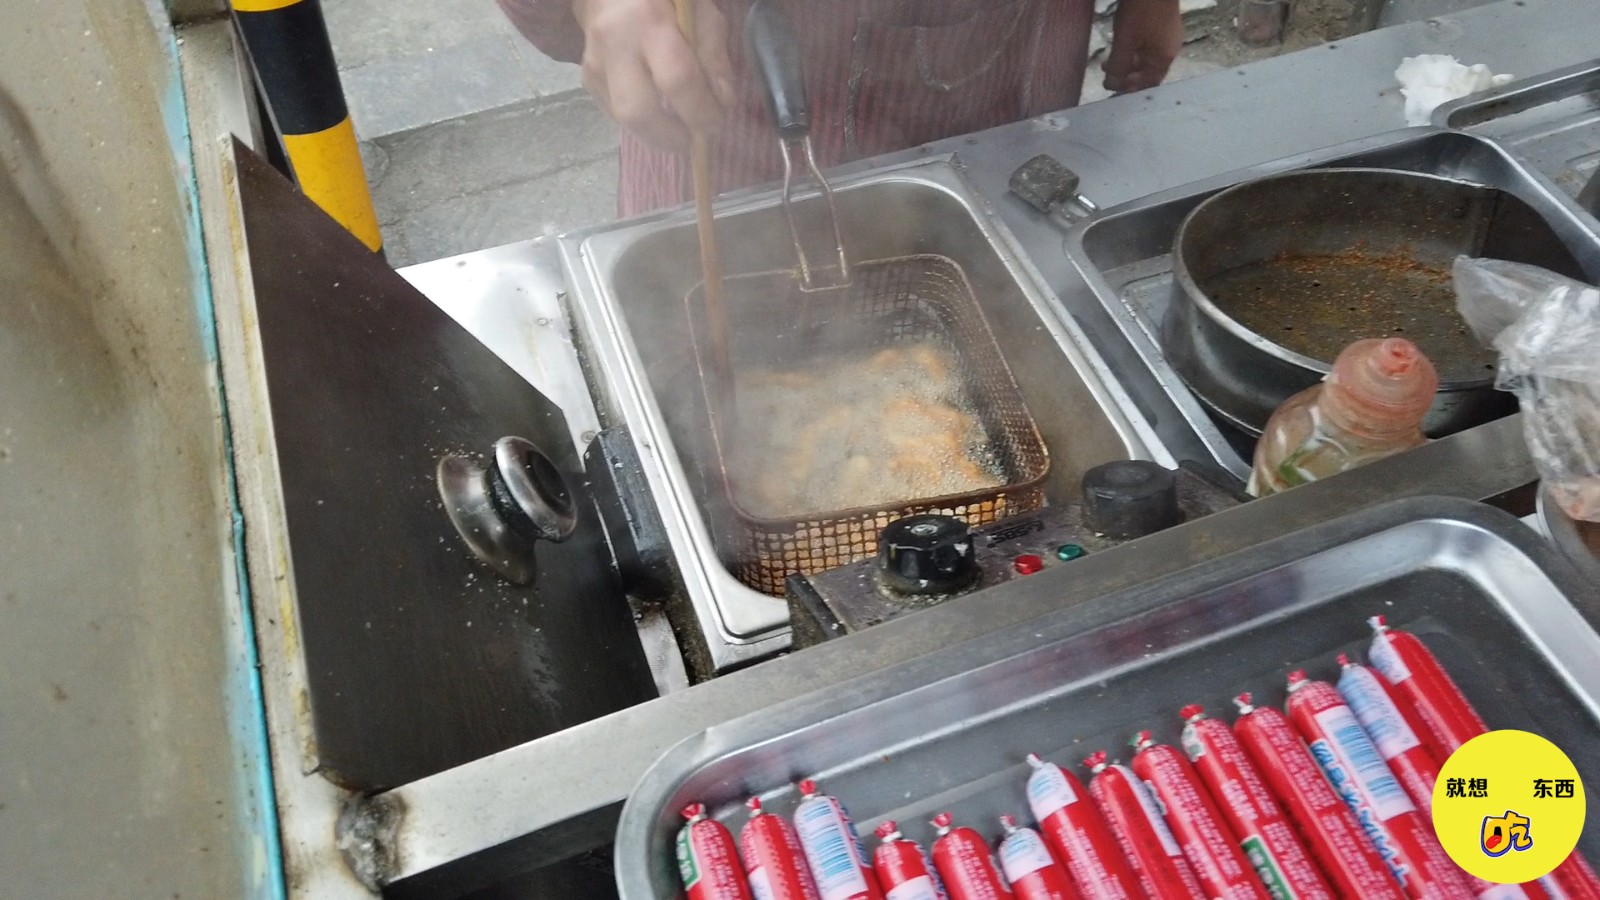 Aunt sells fried chicken willows in the gourmet street. It costs 5 yuan and smells good, but it's also very nervous.